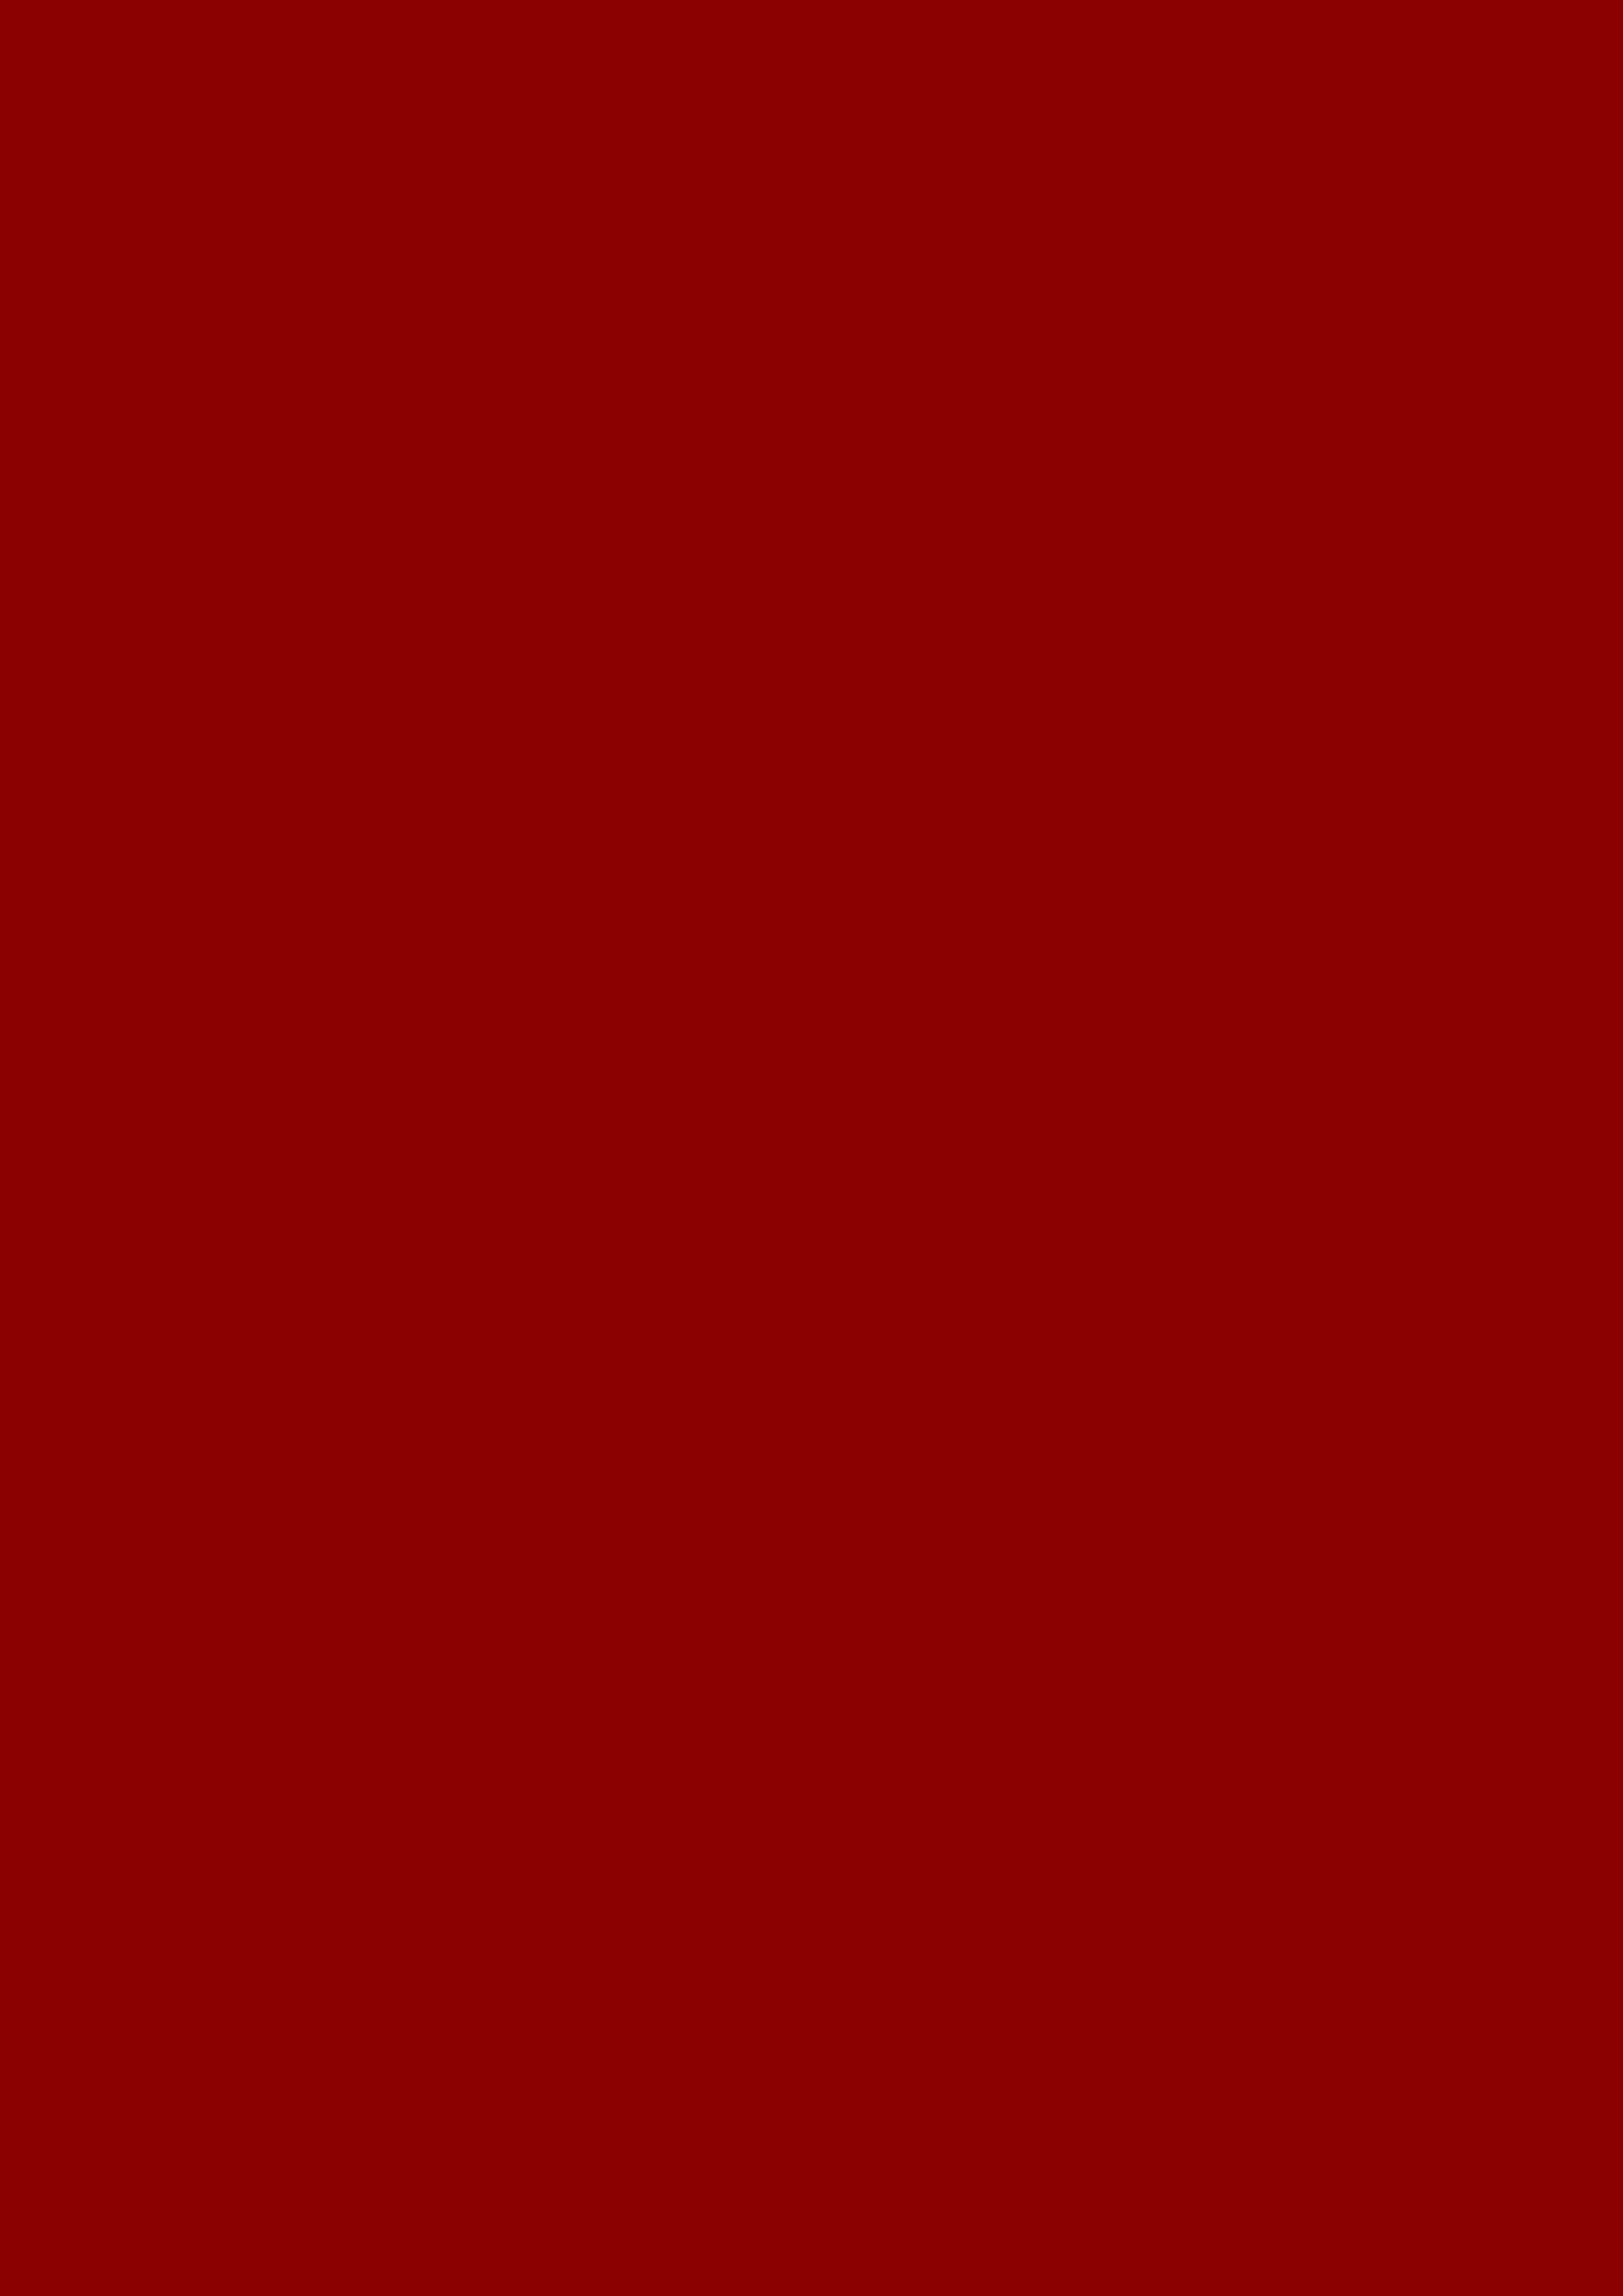 2480x3508 Dark Red Solid Color Background